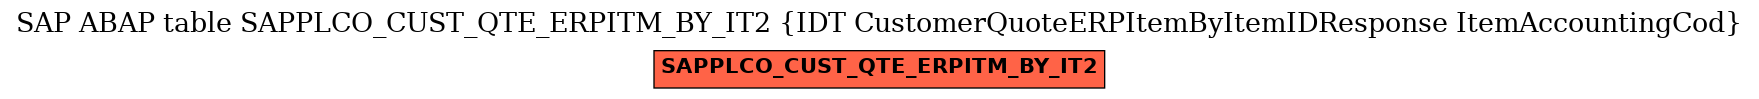 E-R Diagram for table SAPPLCO_CUST_QTE_ERPITM_BY_IT2 (IDT CustomerQuoteERPItemByItemIDResponse ItemAccountingCod)